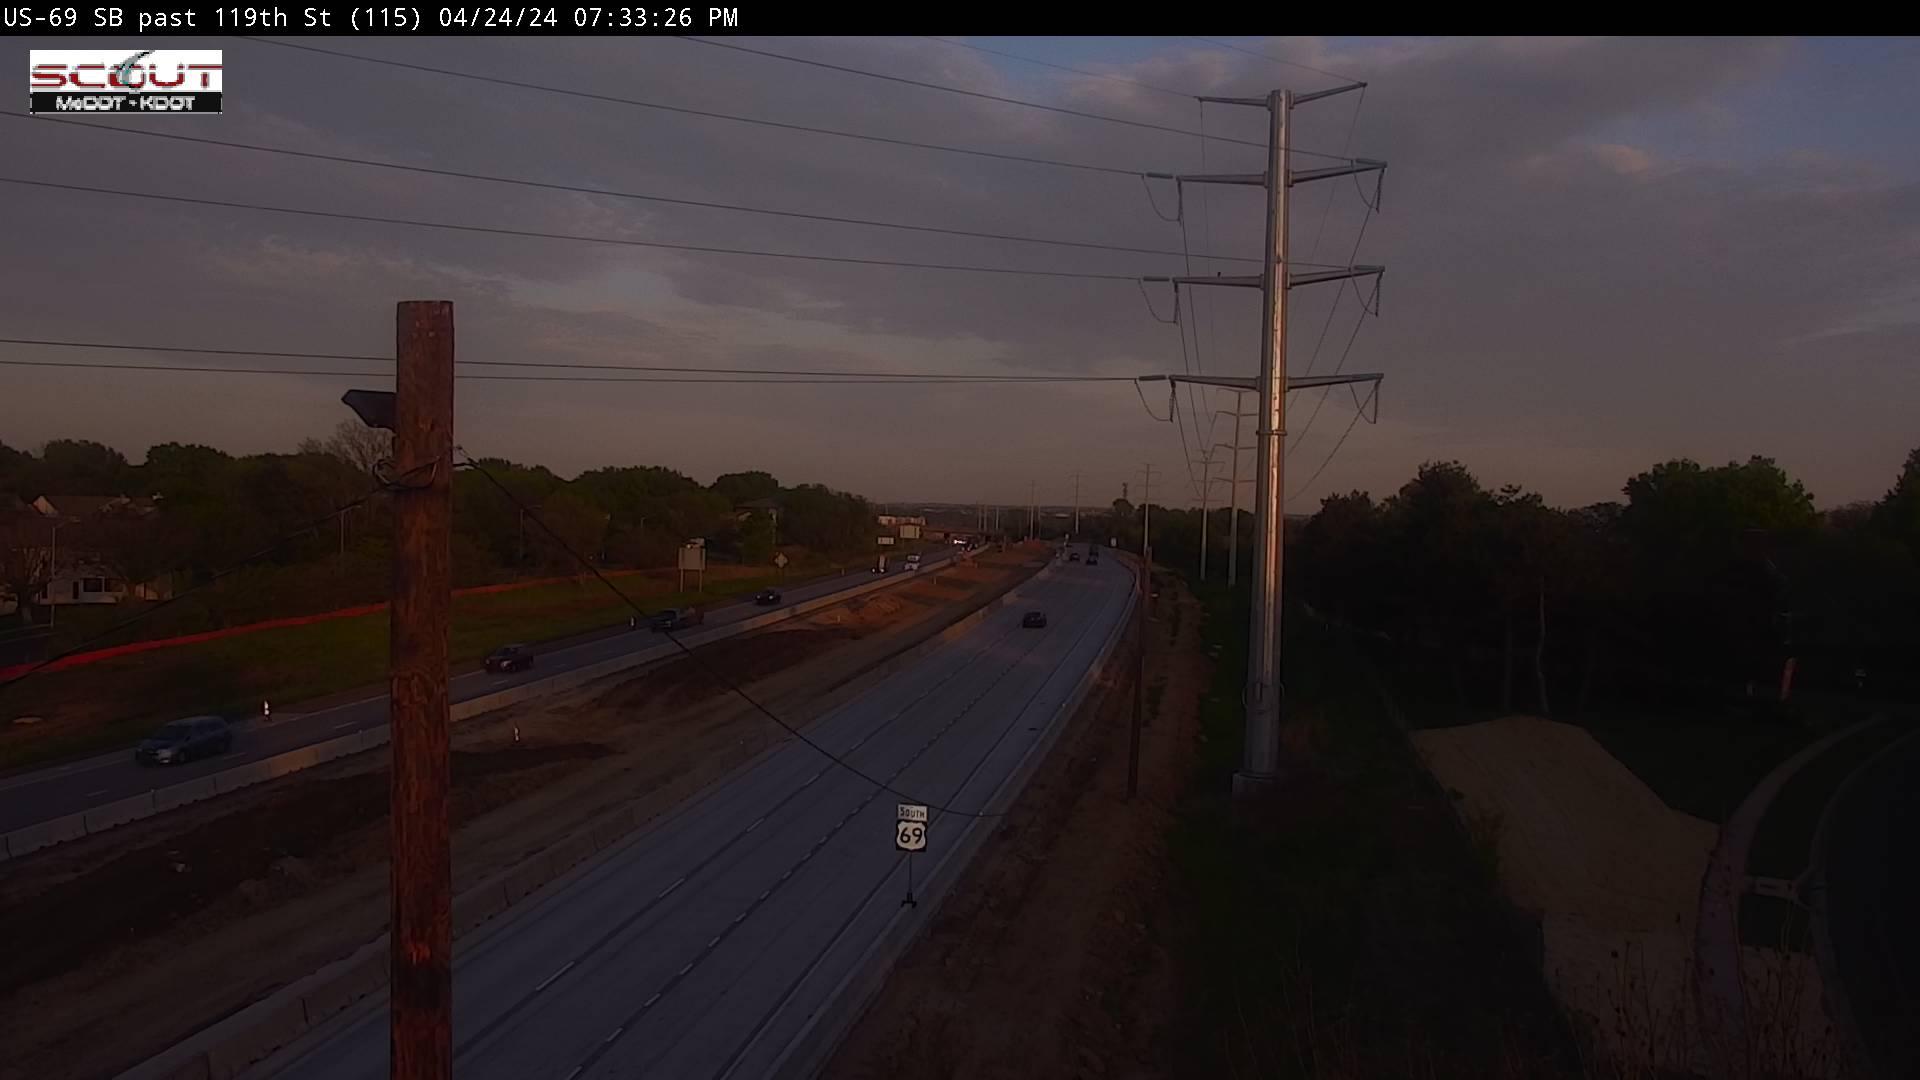 Overland Park: US-69 S @ SOUTH OF 119TH ST Traffic Camera